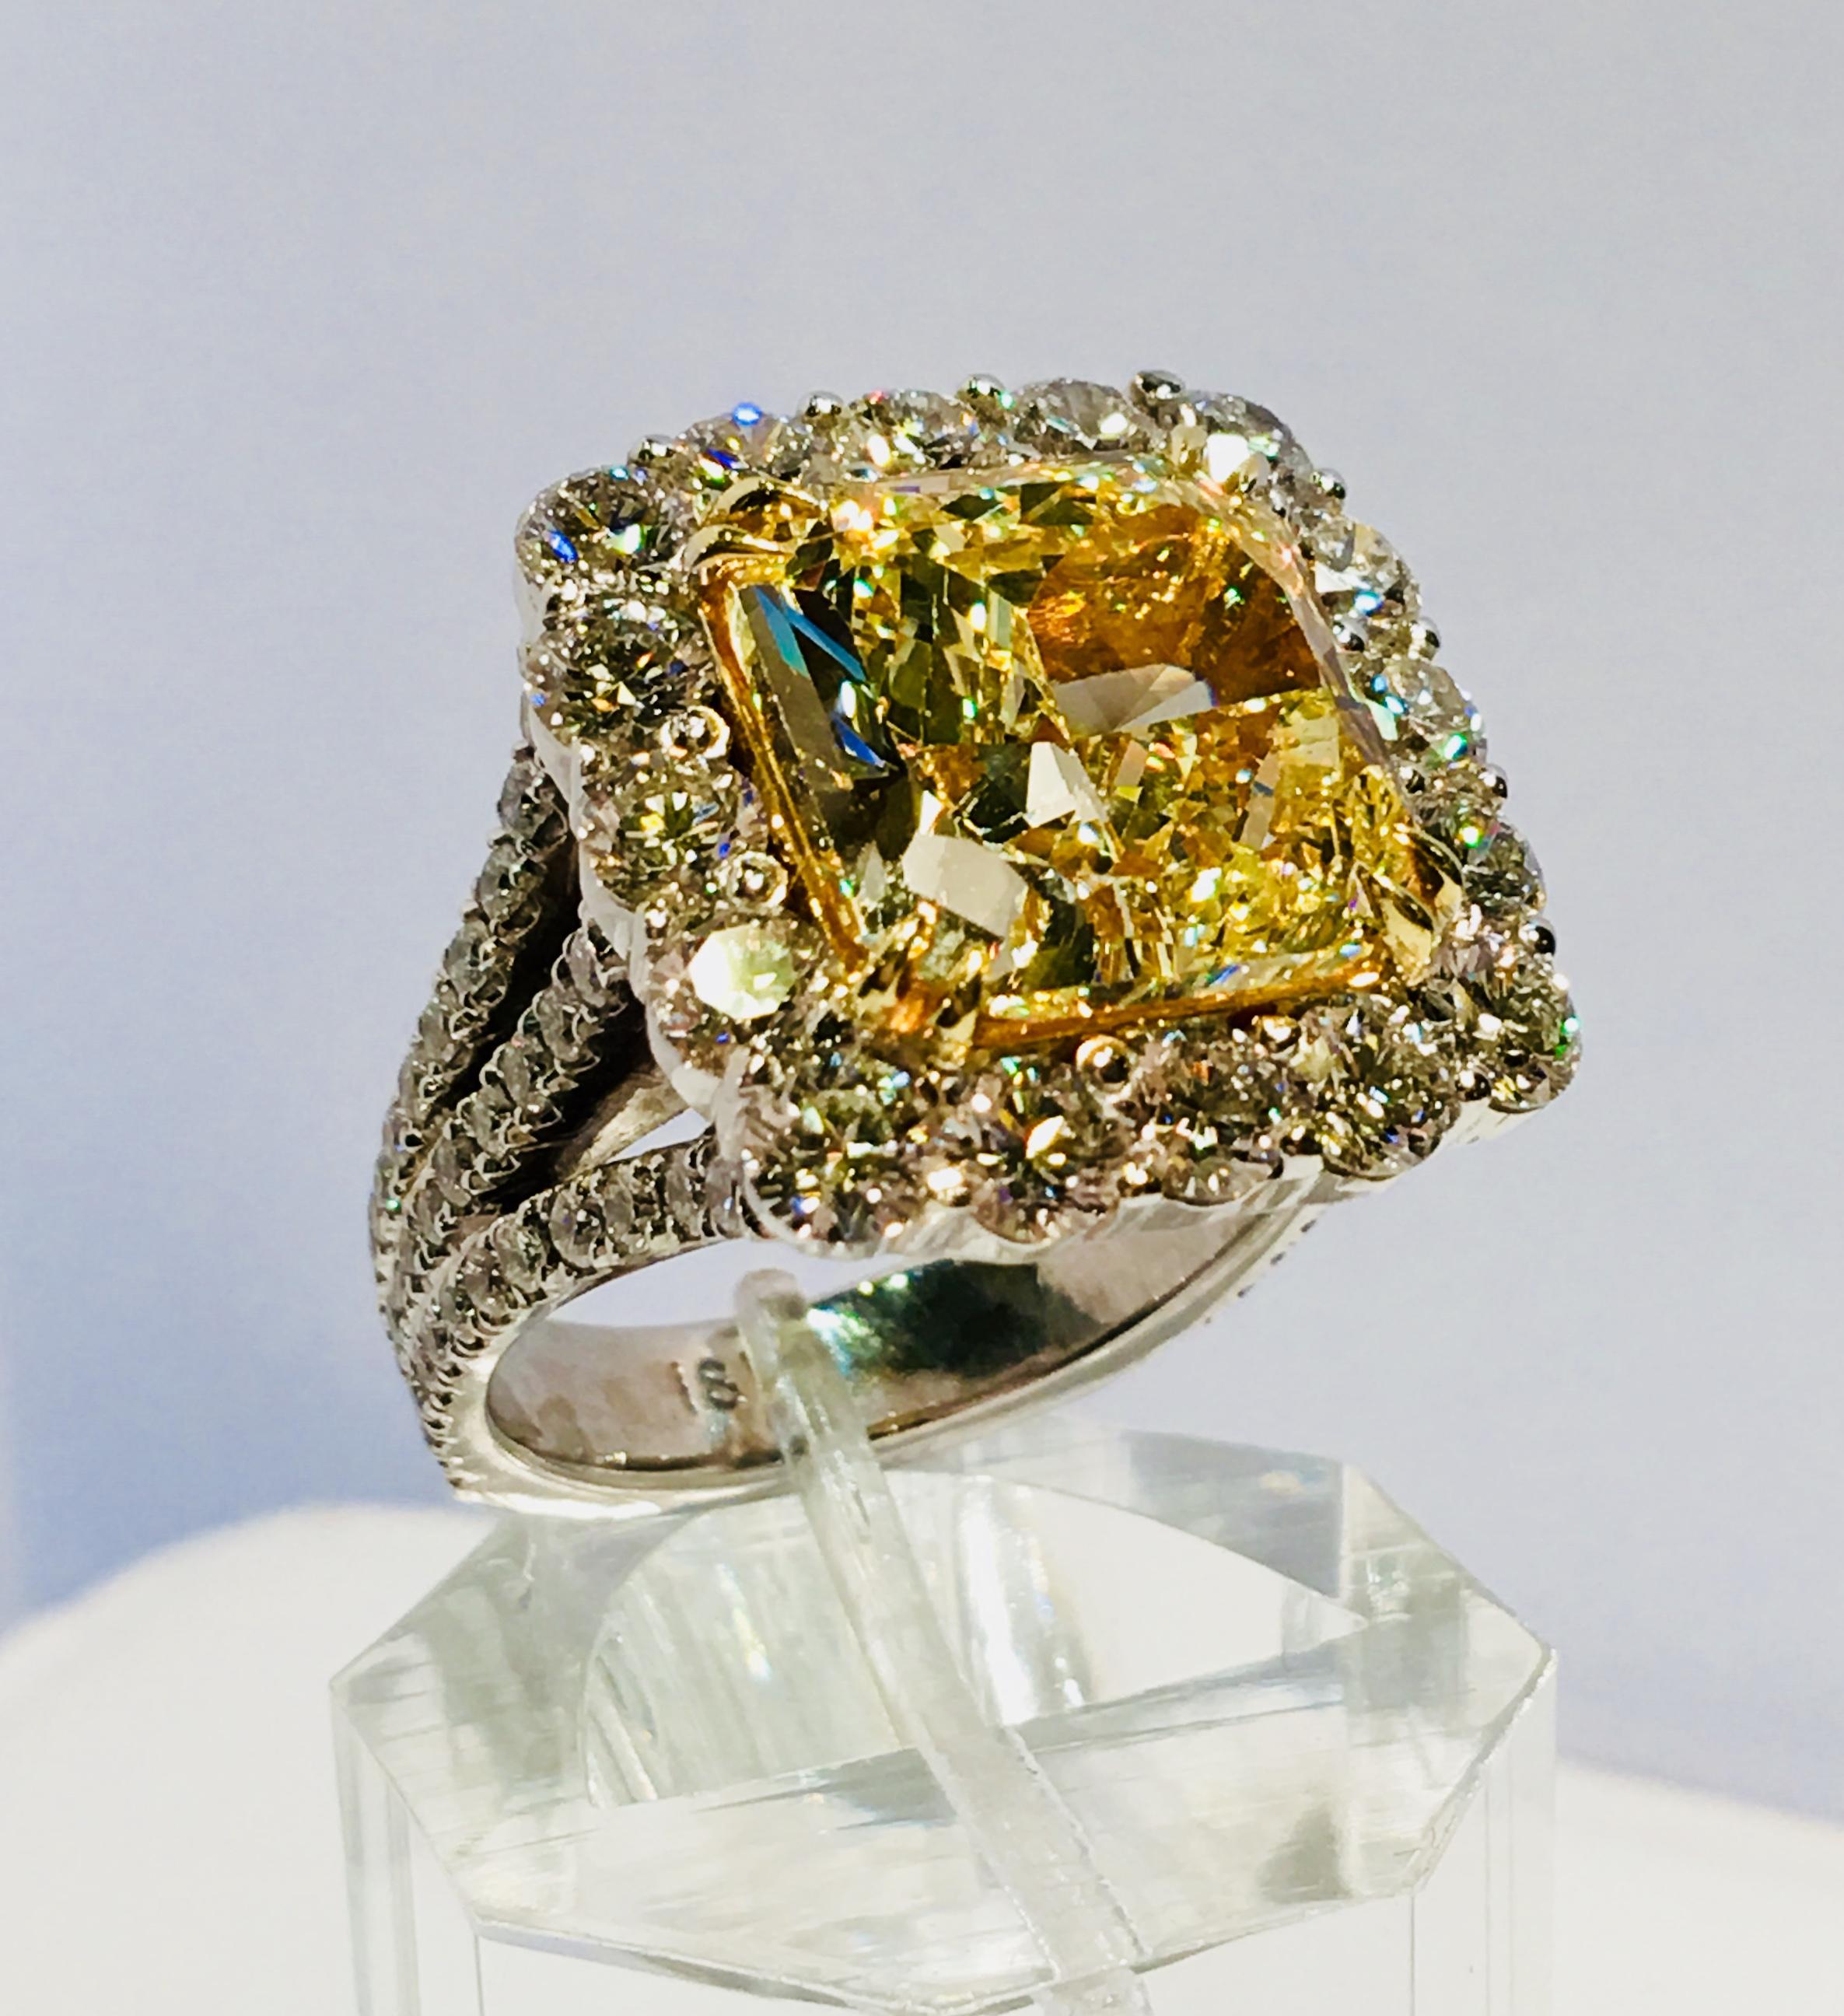 Radiant Cut Stunning 8.48 Carat Certified Natural Fancy Yellow Square Cut Diamond Halo Ring